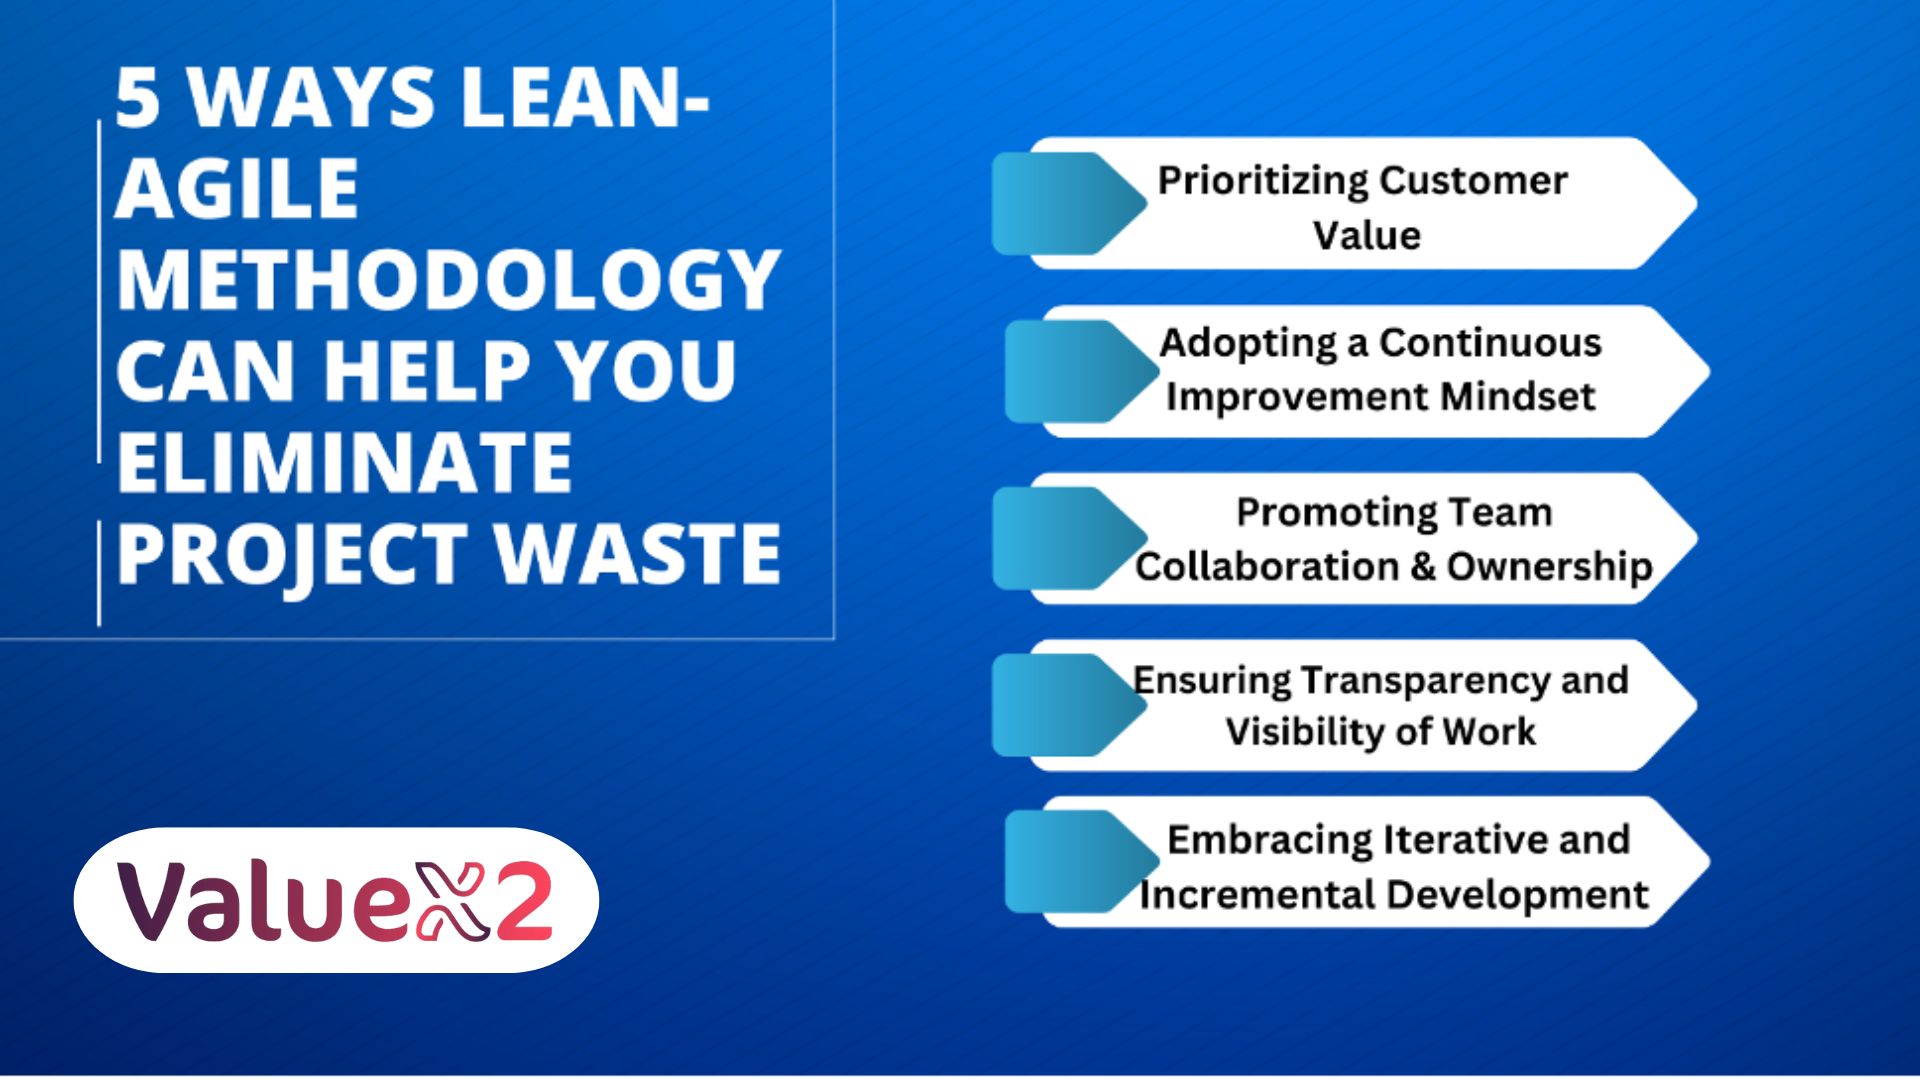 5 Ways Lean-Agile Methodology Can Help You Eliminate Project Waste 